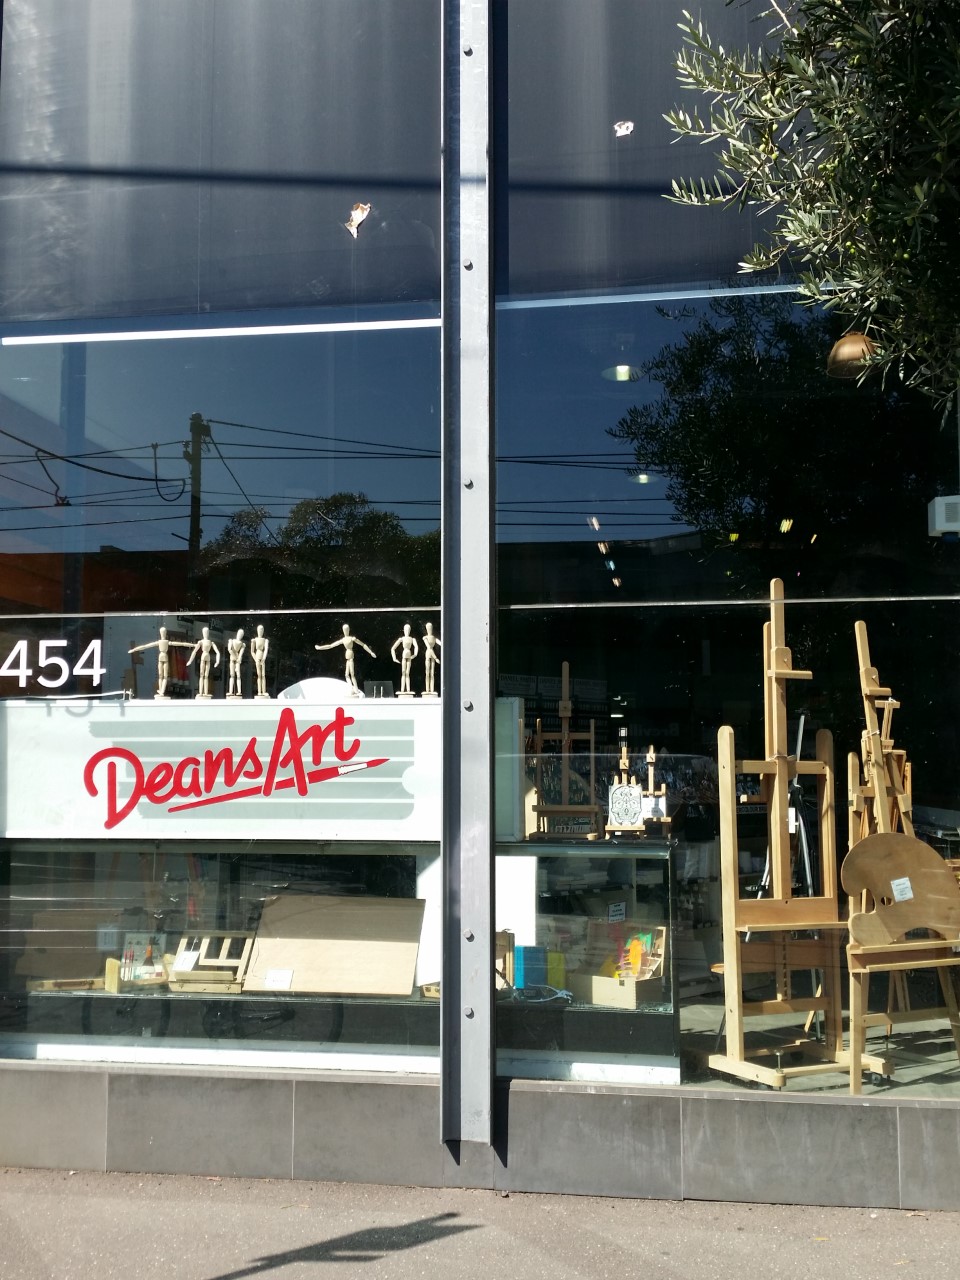 Deans Art | moved from 188 Gertrude St Fitzroy TO, 454 Smith St, Collingwood VIC 3066, Australia | Phone: (03) 9419 6221